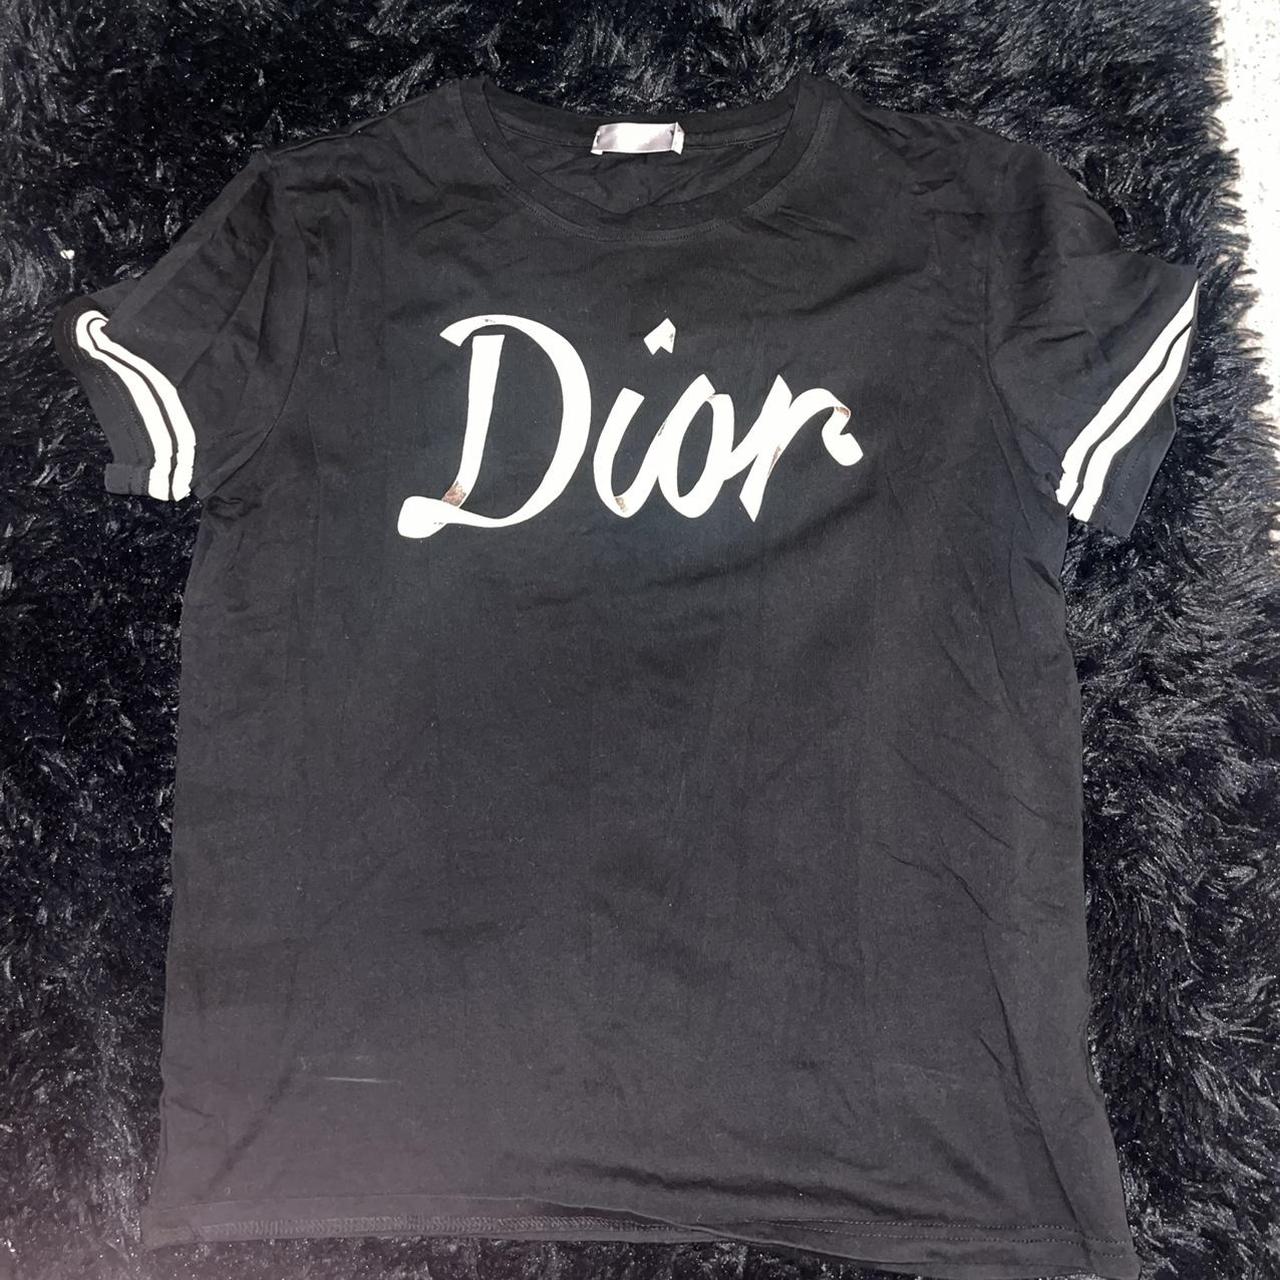 Christian Dior Couture Tee Embroidered graphic New - Depop